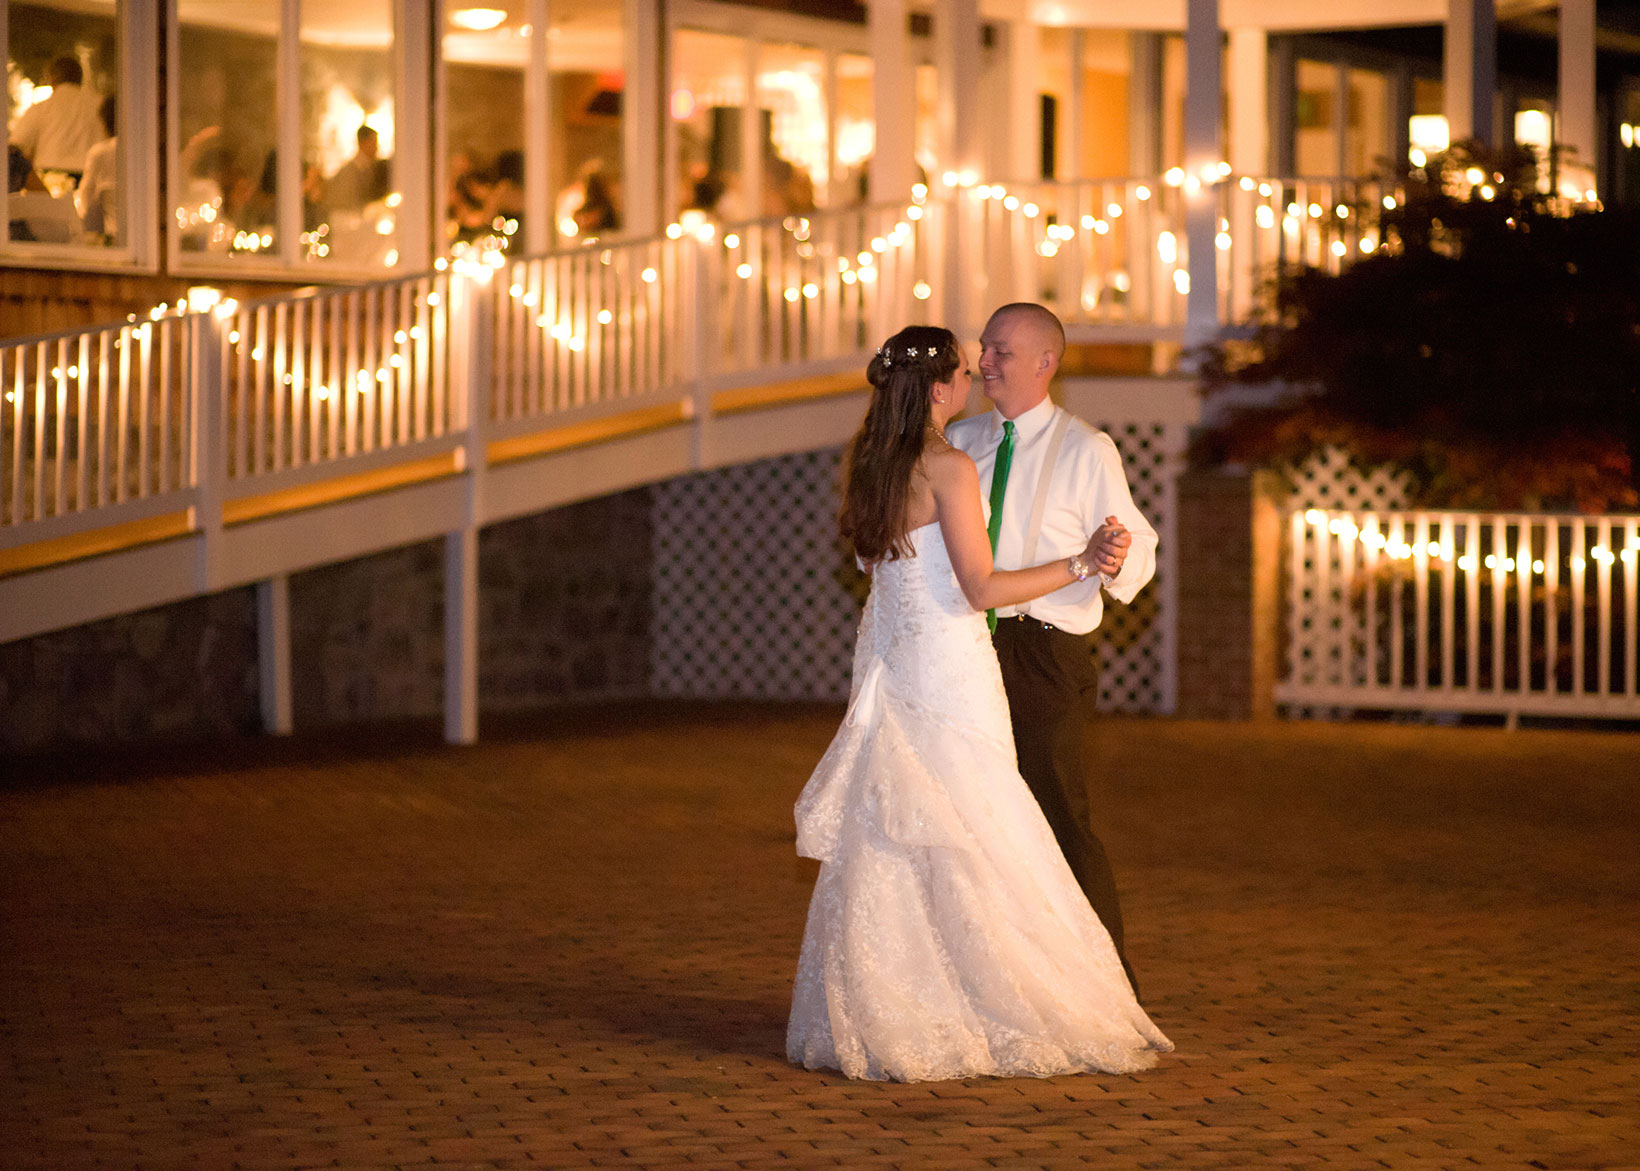 Newly weds dancing in an illuminated area